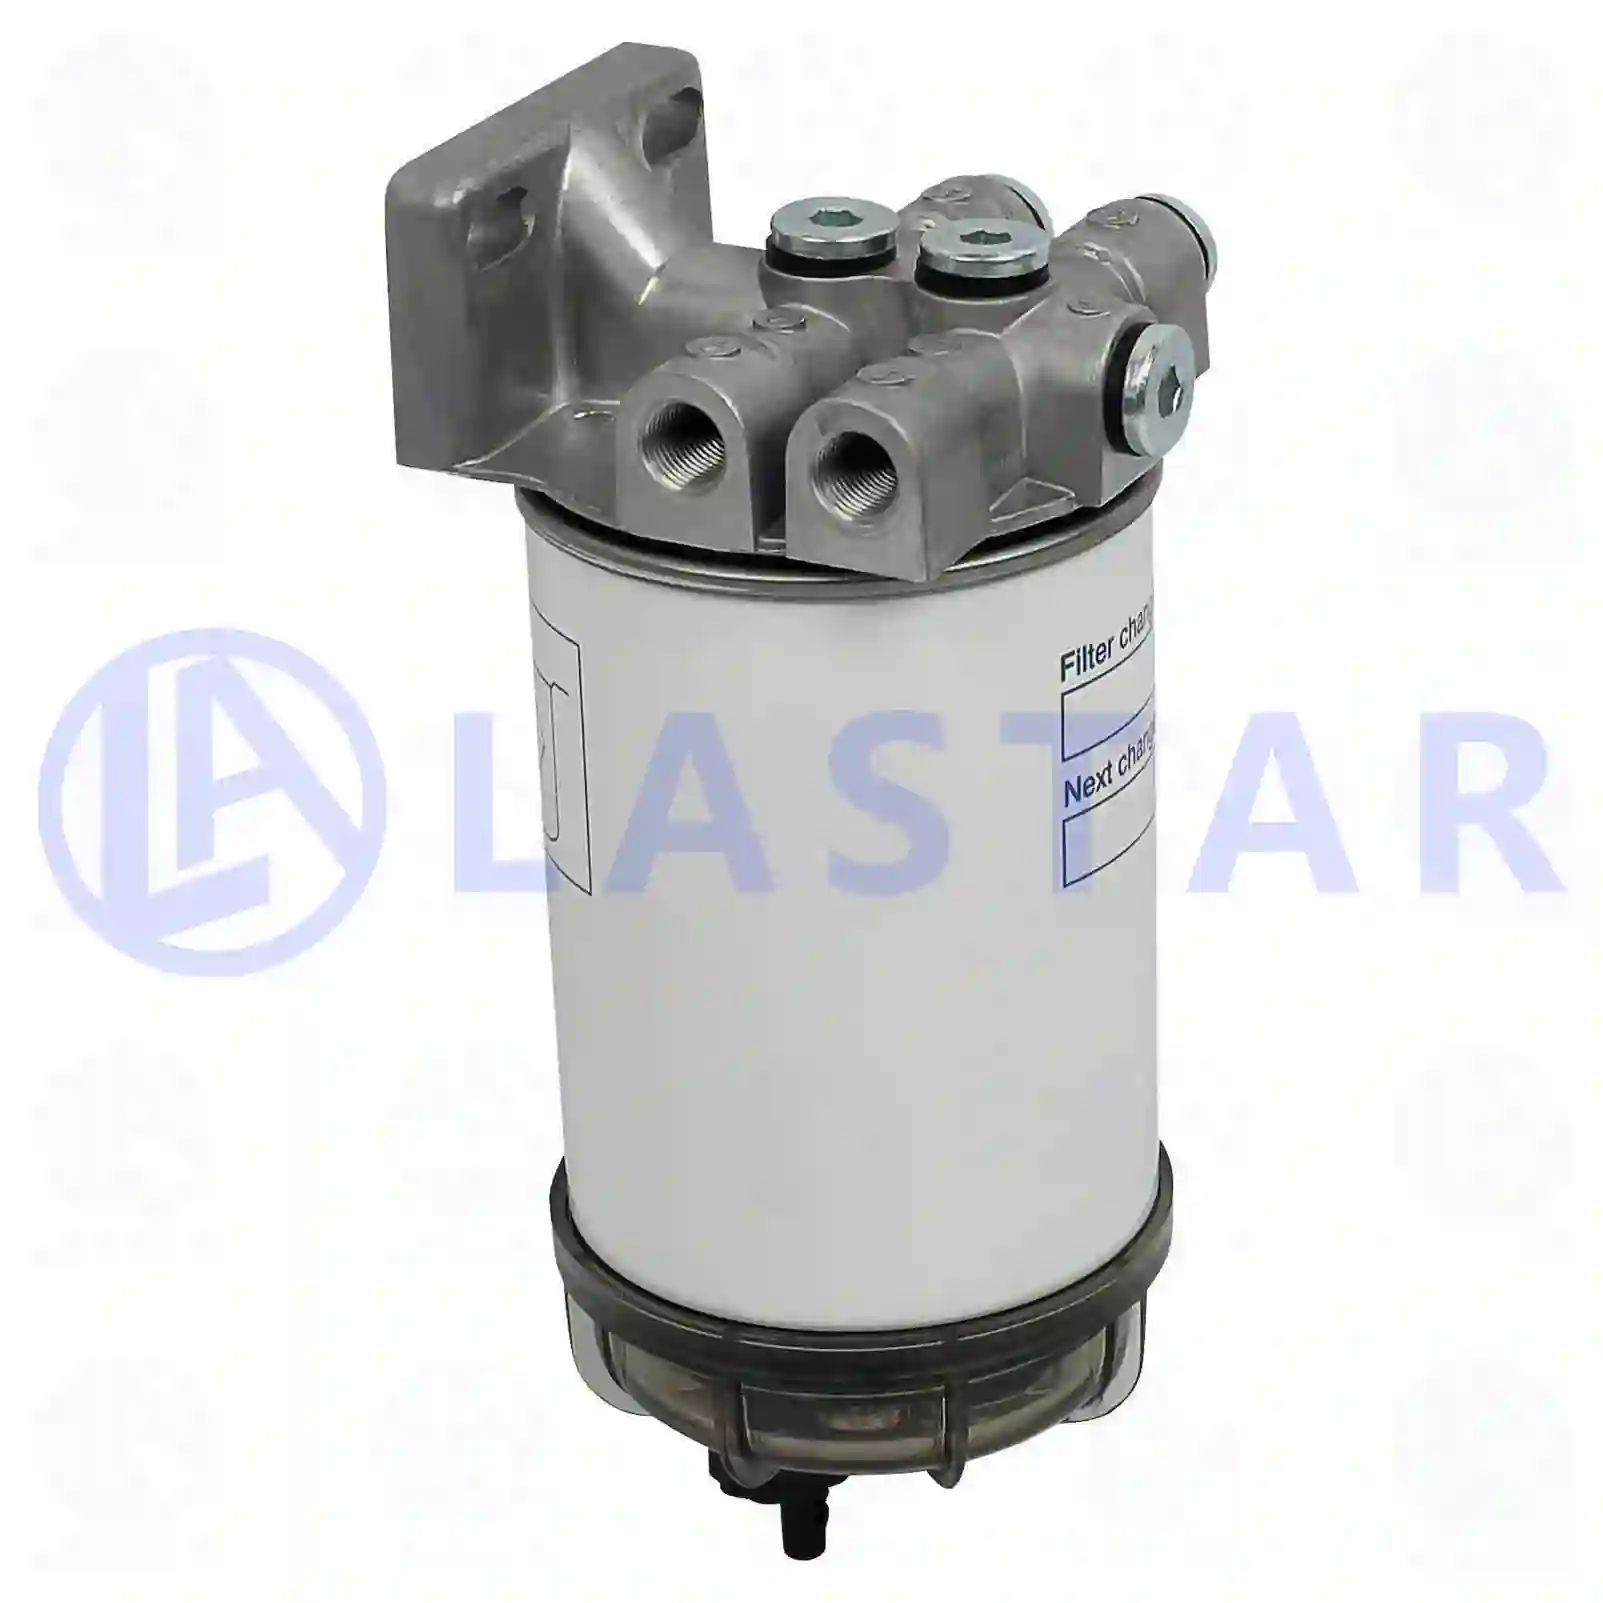  Fuel filter, water separator, complete || Lastar Spare Part | Truck Spare Parts, Auotomotive Spare Parts